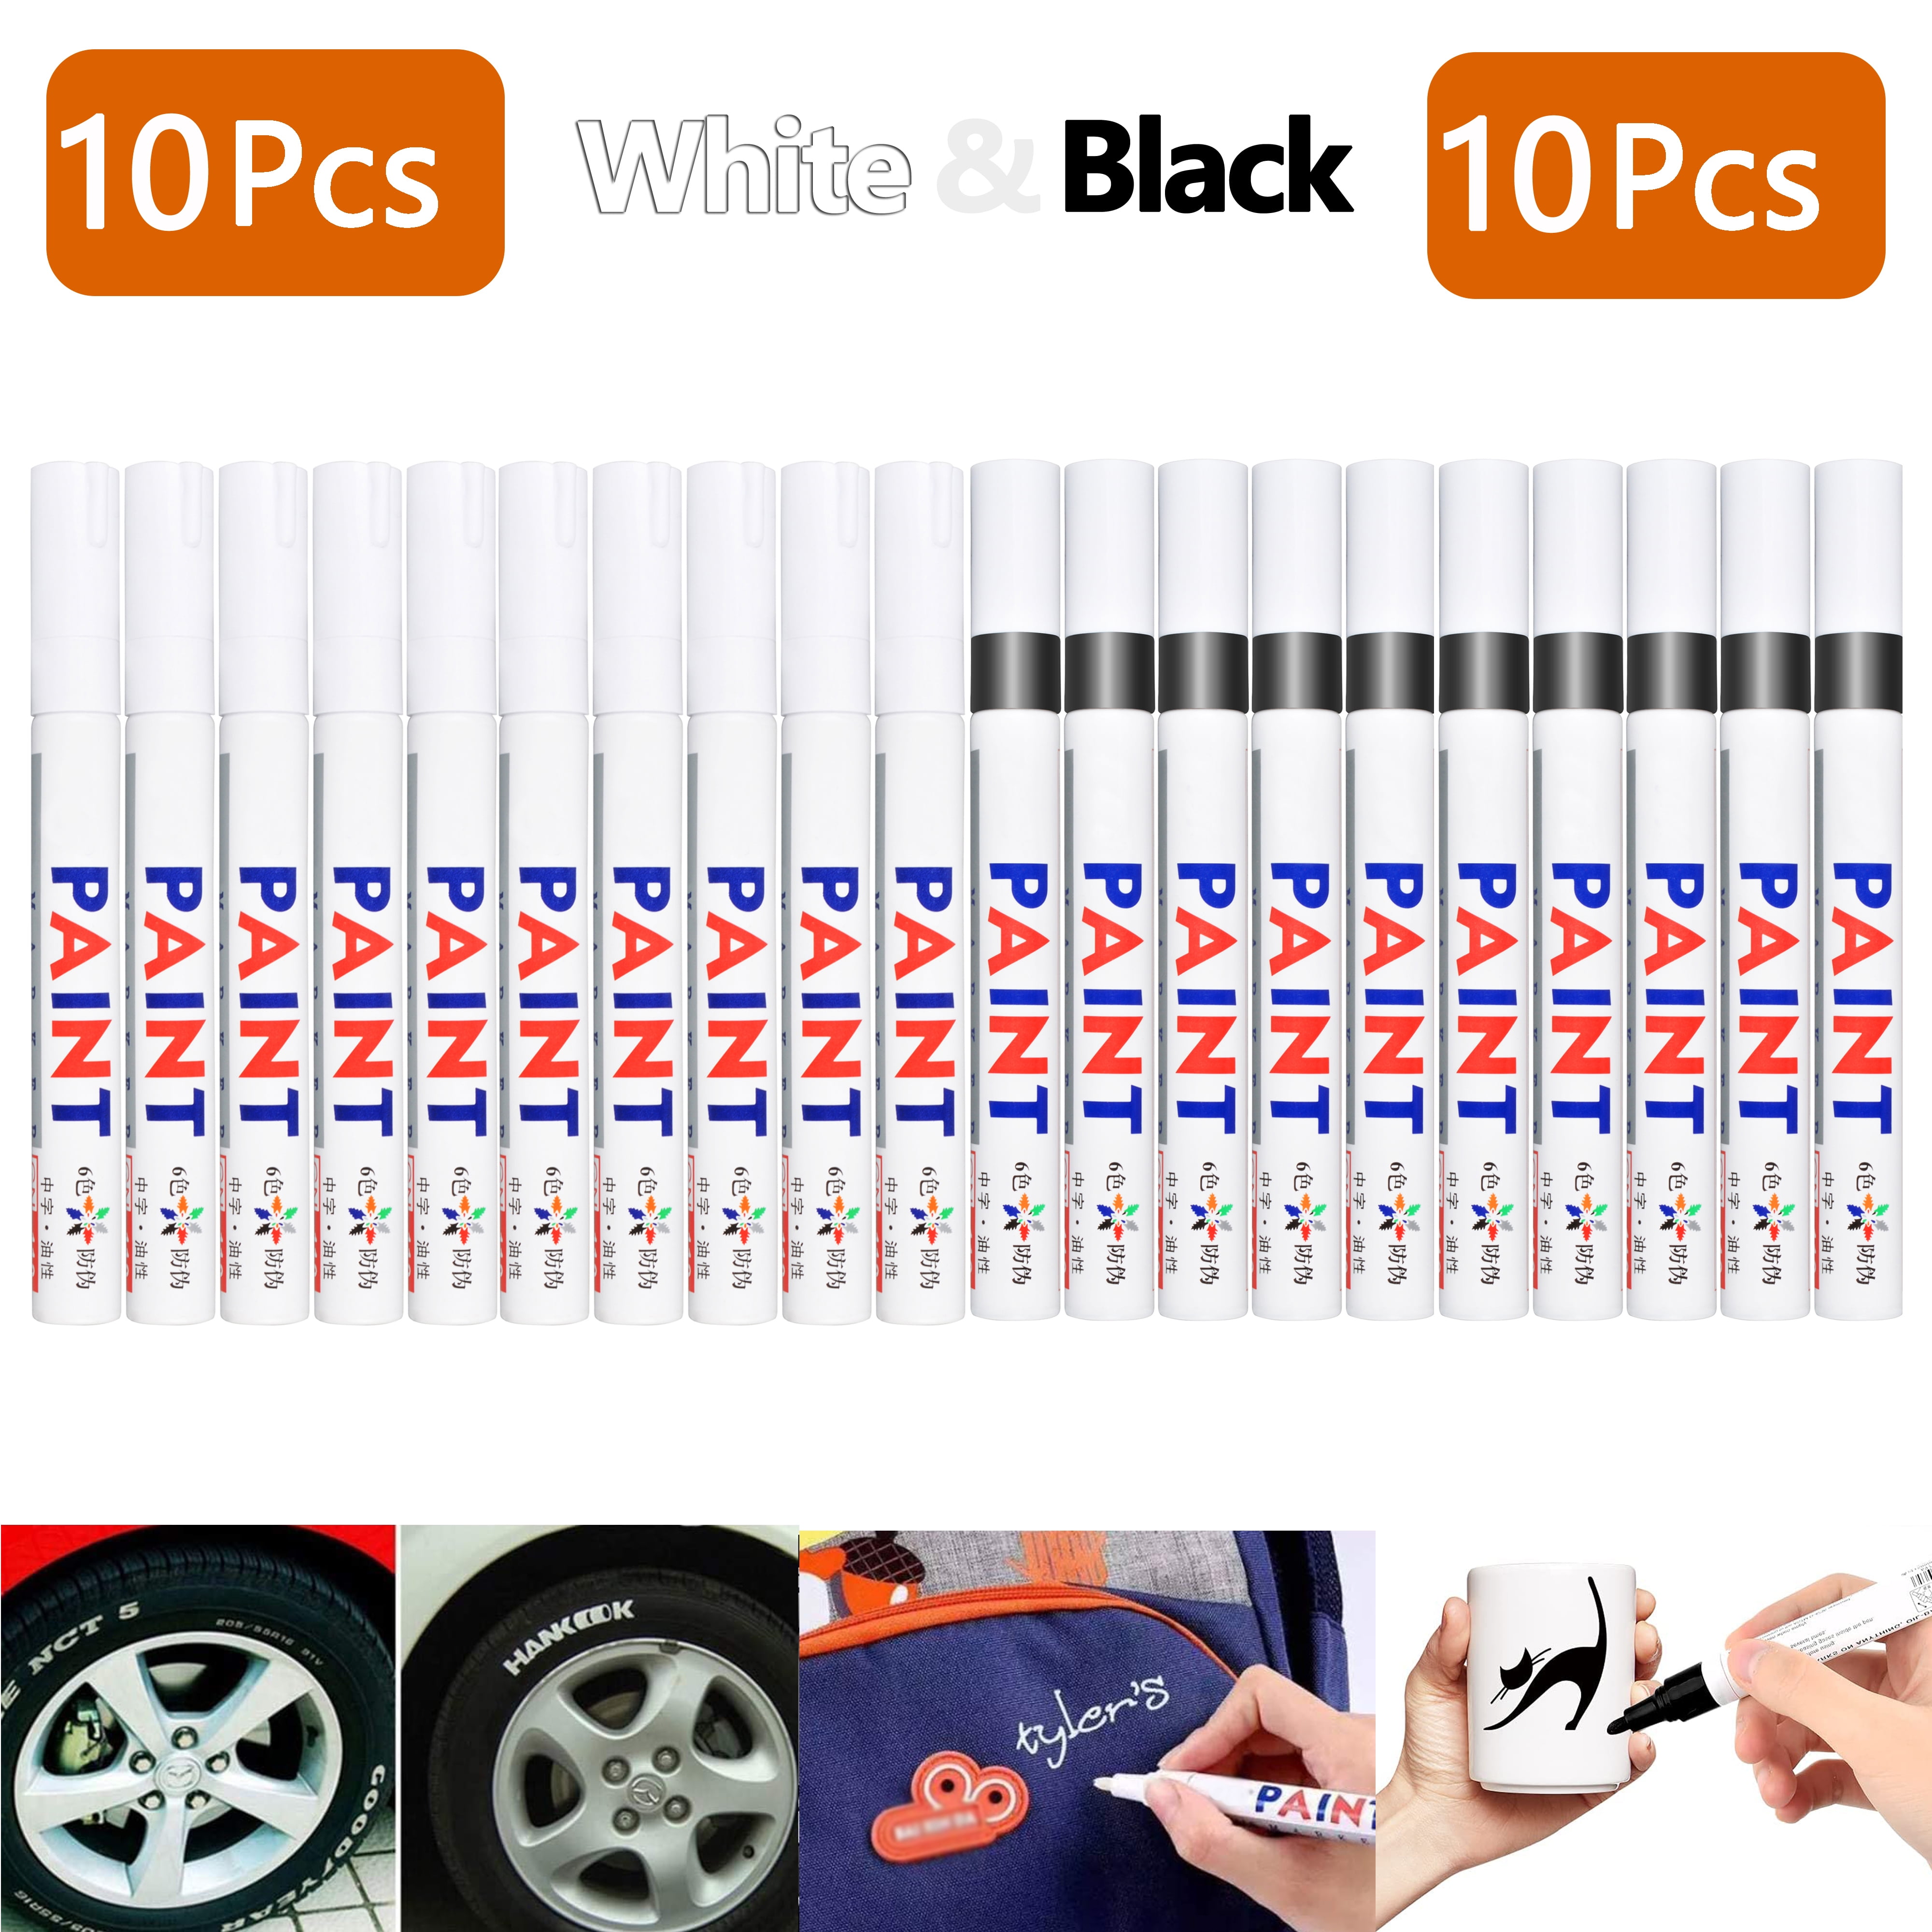 5pcs Waterproof Fine Tip Drawing Graffiti Marker Pens In White Color.  Suitable For Tire, Wood, Paper And Other Materials